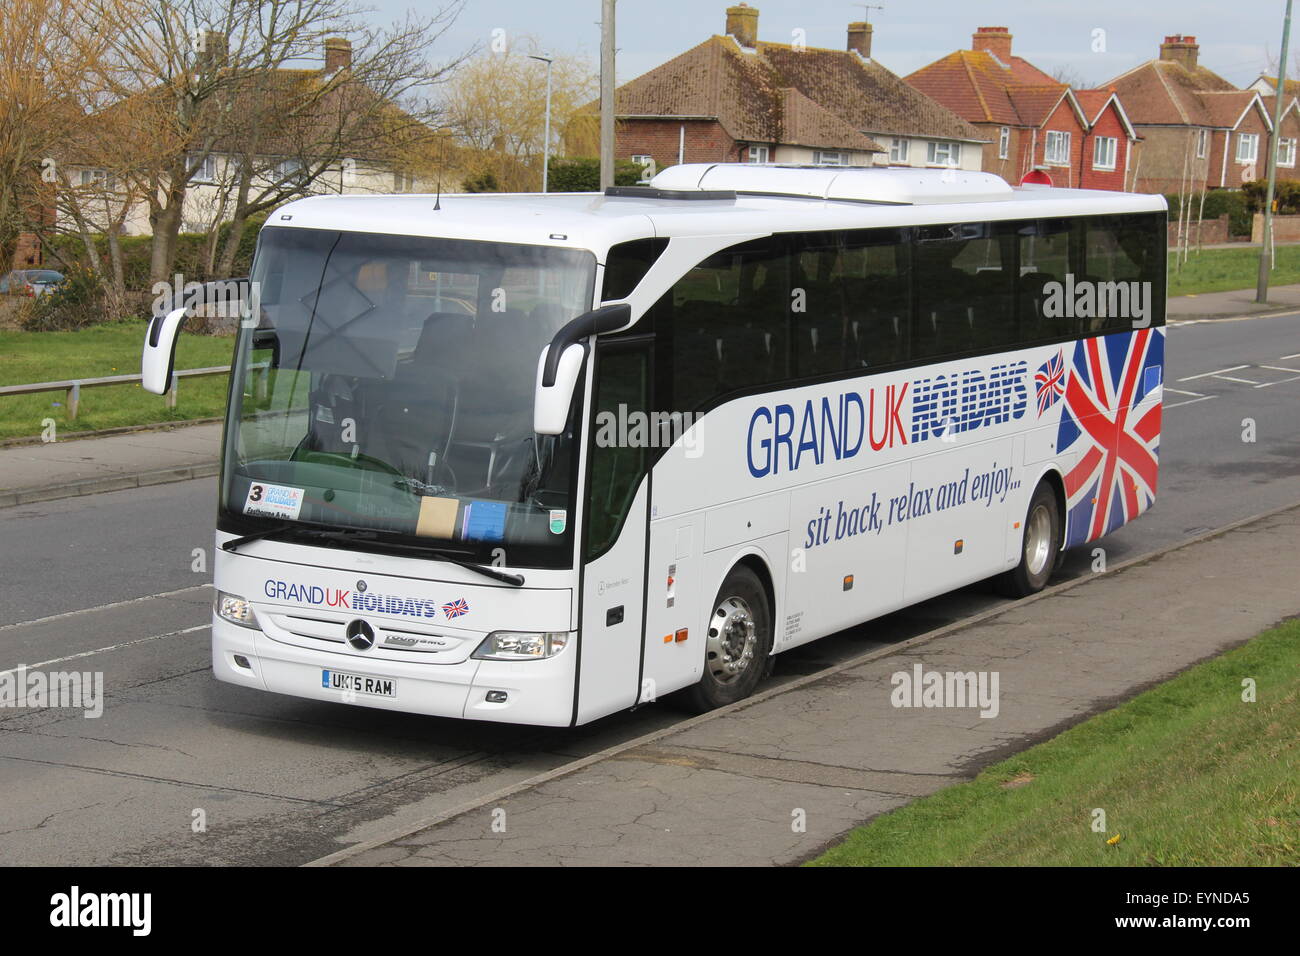 GRAND UK HOLIDAYS LUXURY MECEDES COACH PICTURE OF FRONT AND KERBSIDE Stock Photo